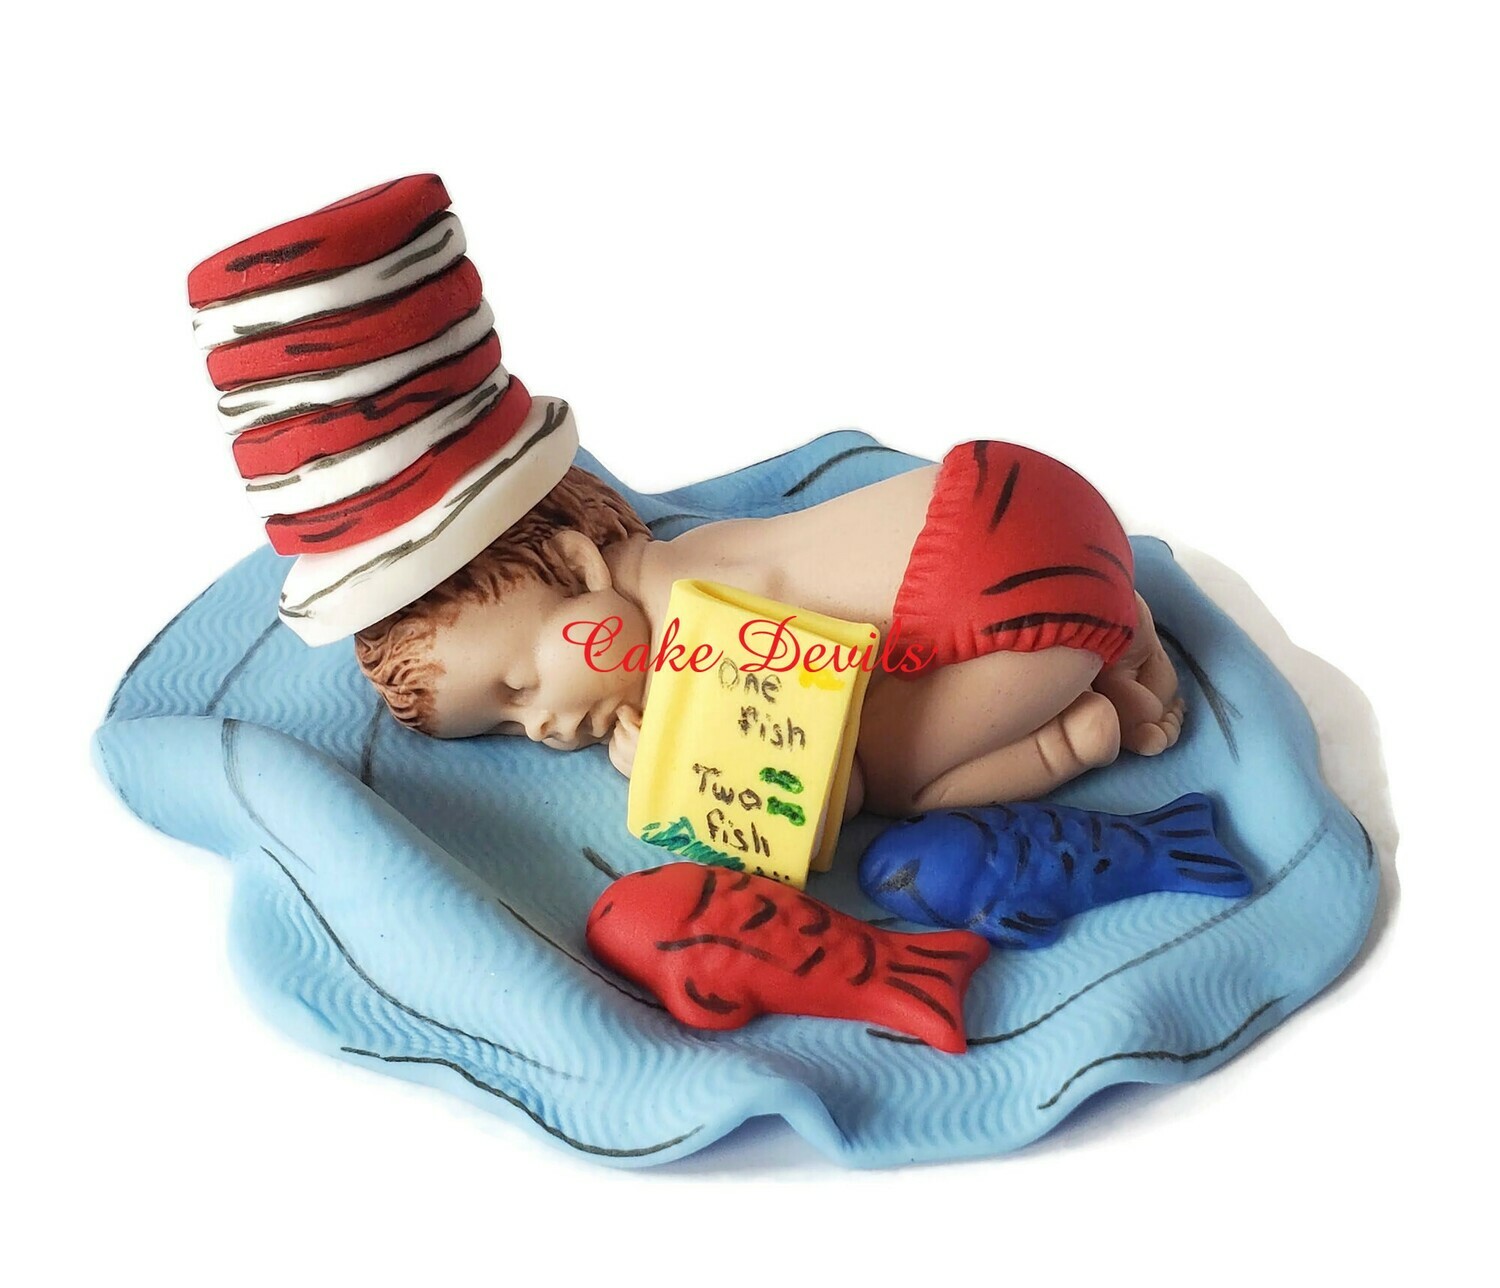 Dr Seuss Baby Shower Fondant Cake Topper - One Fish, Two Fish, Red Fish Blue Fish